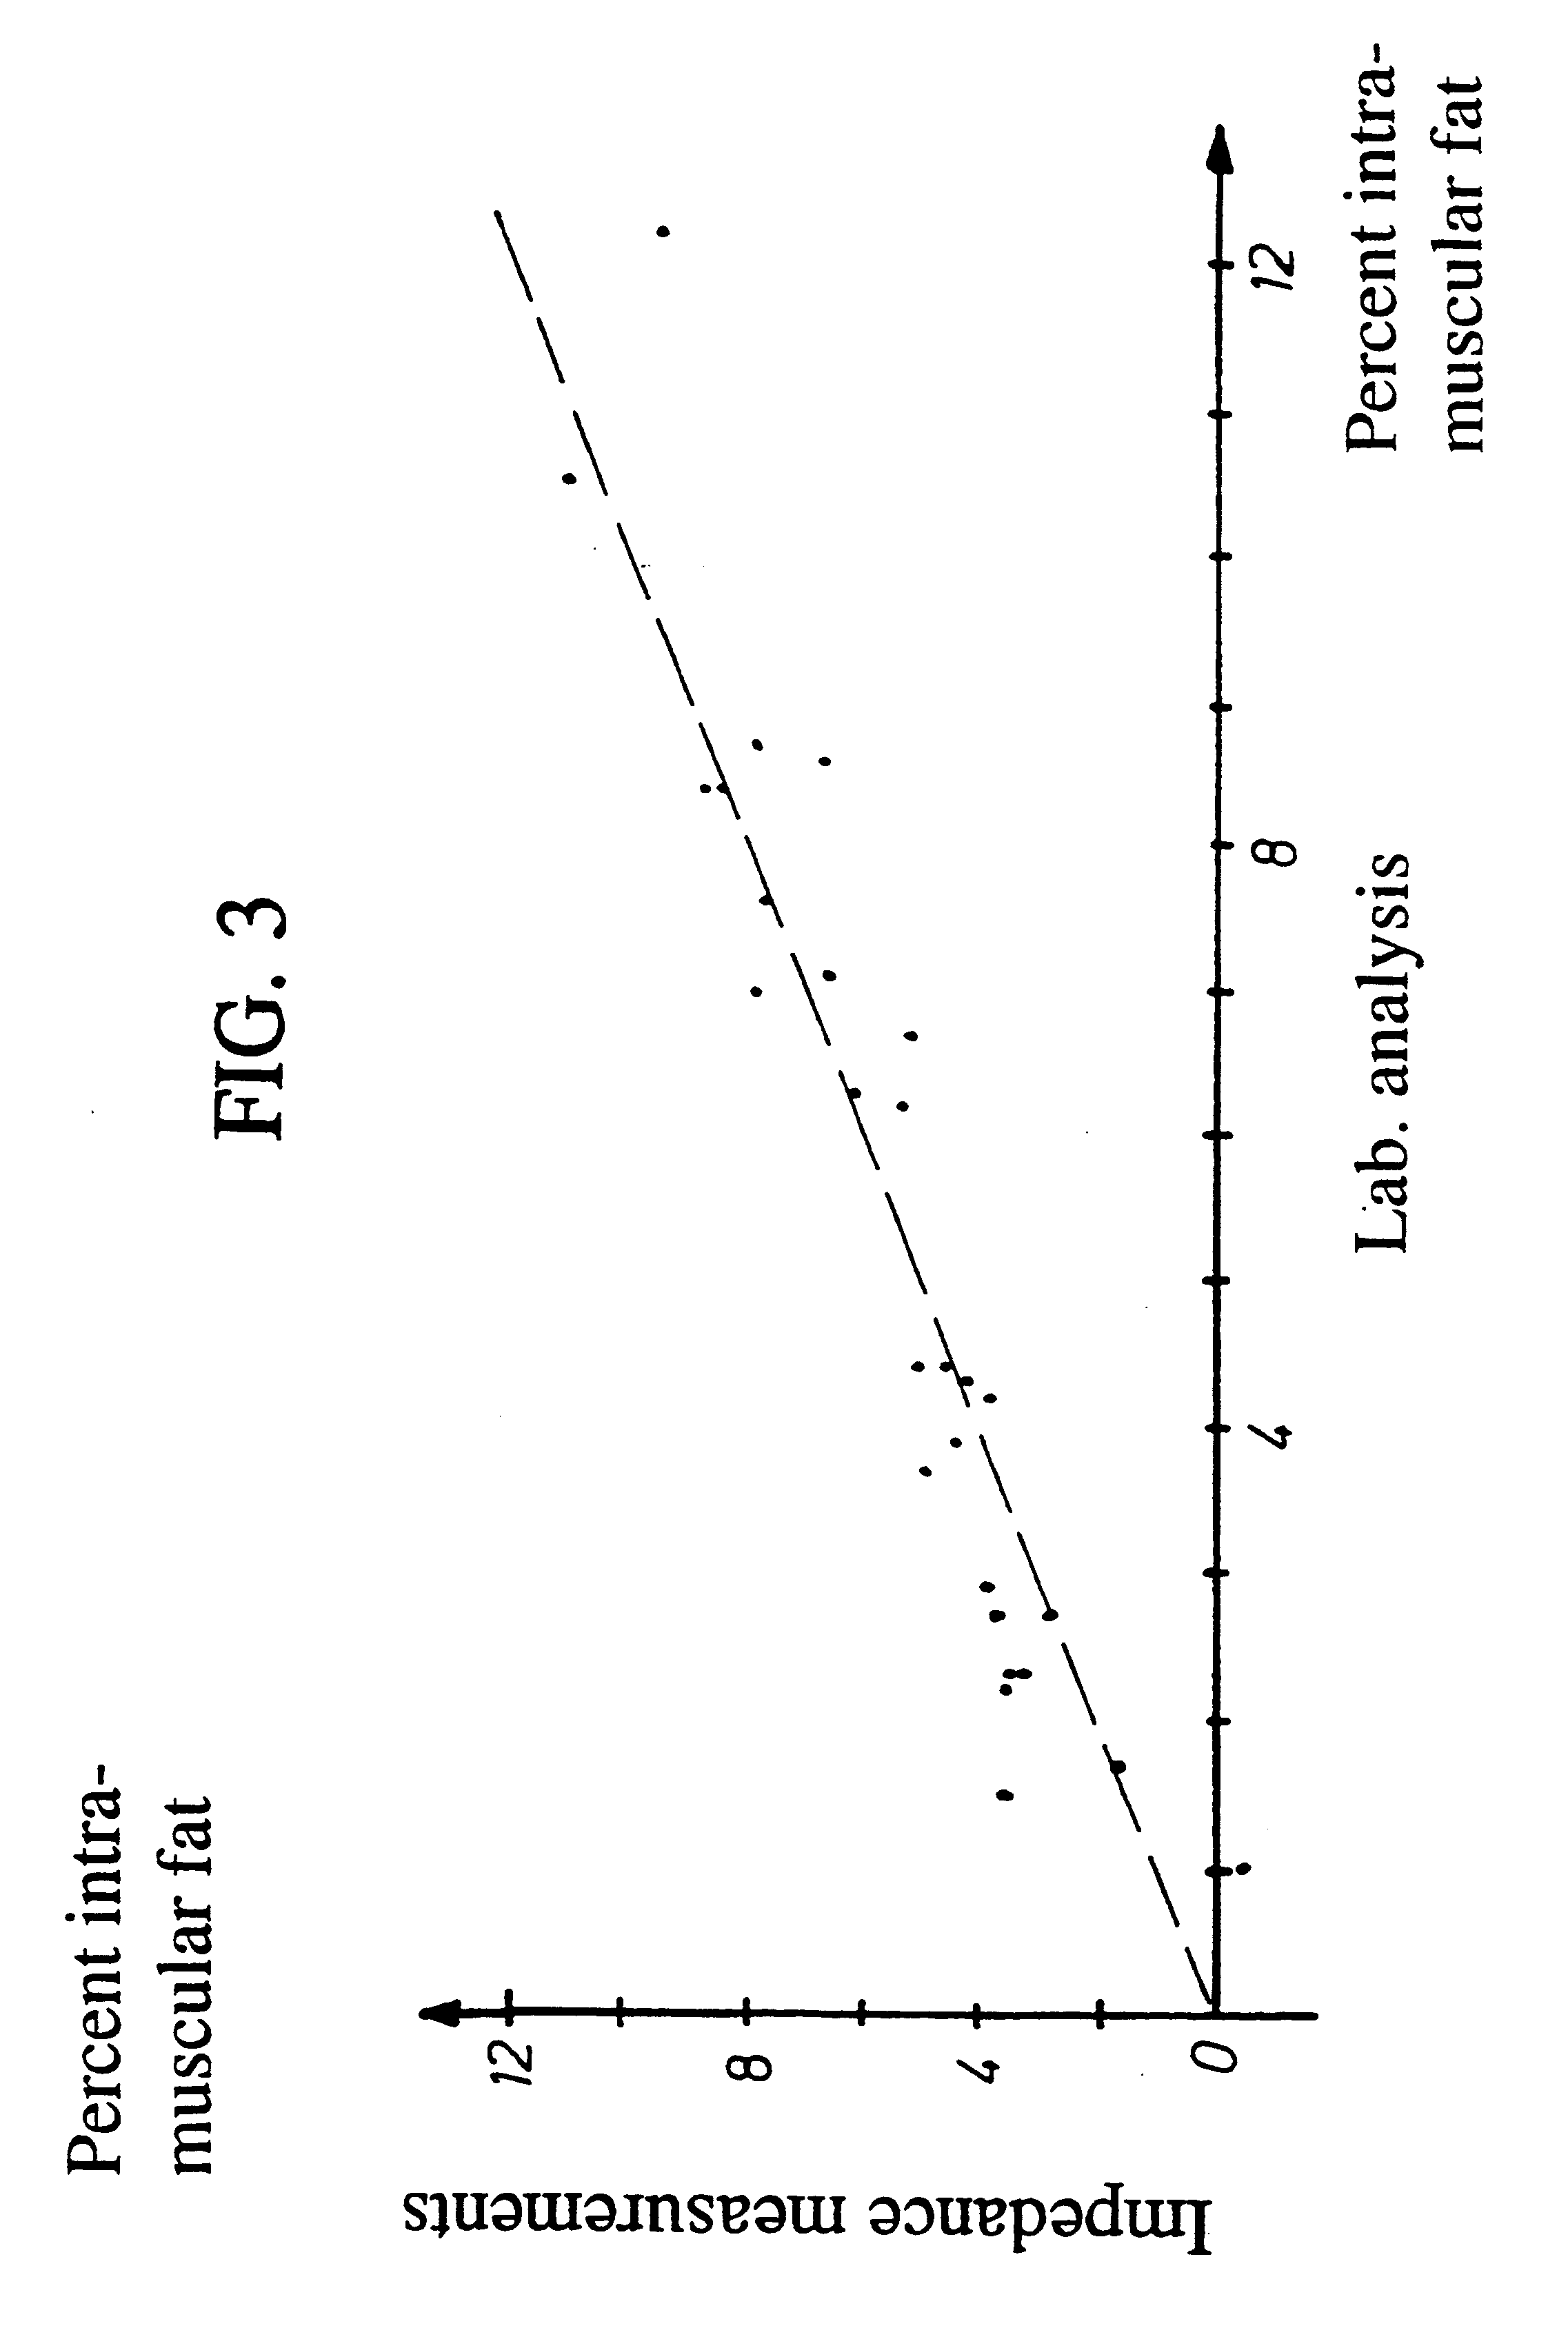 Apparatus and method for measuring the content of intramuscular fat in carcasses or parts thereof